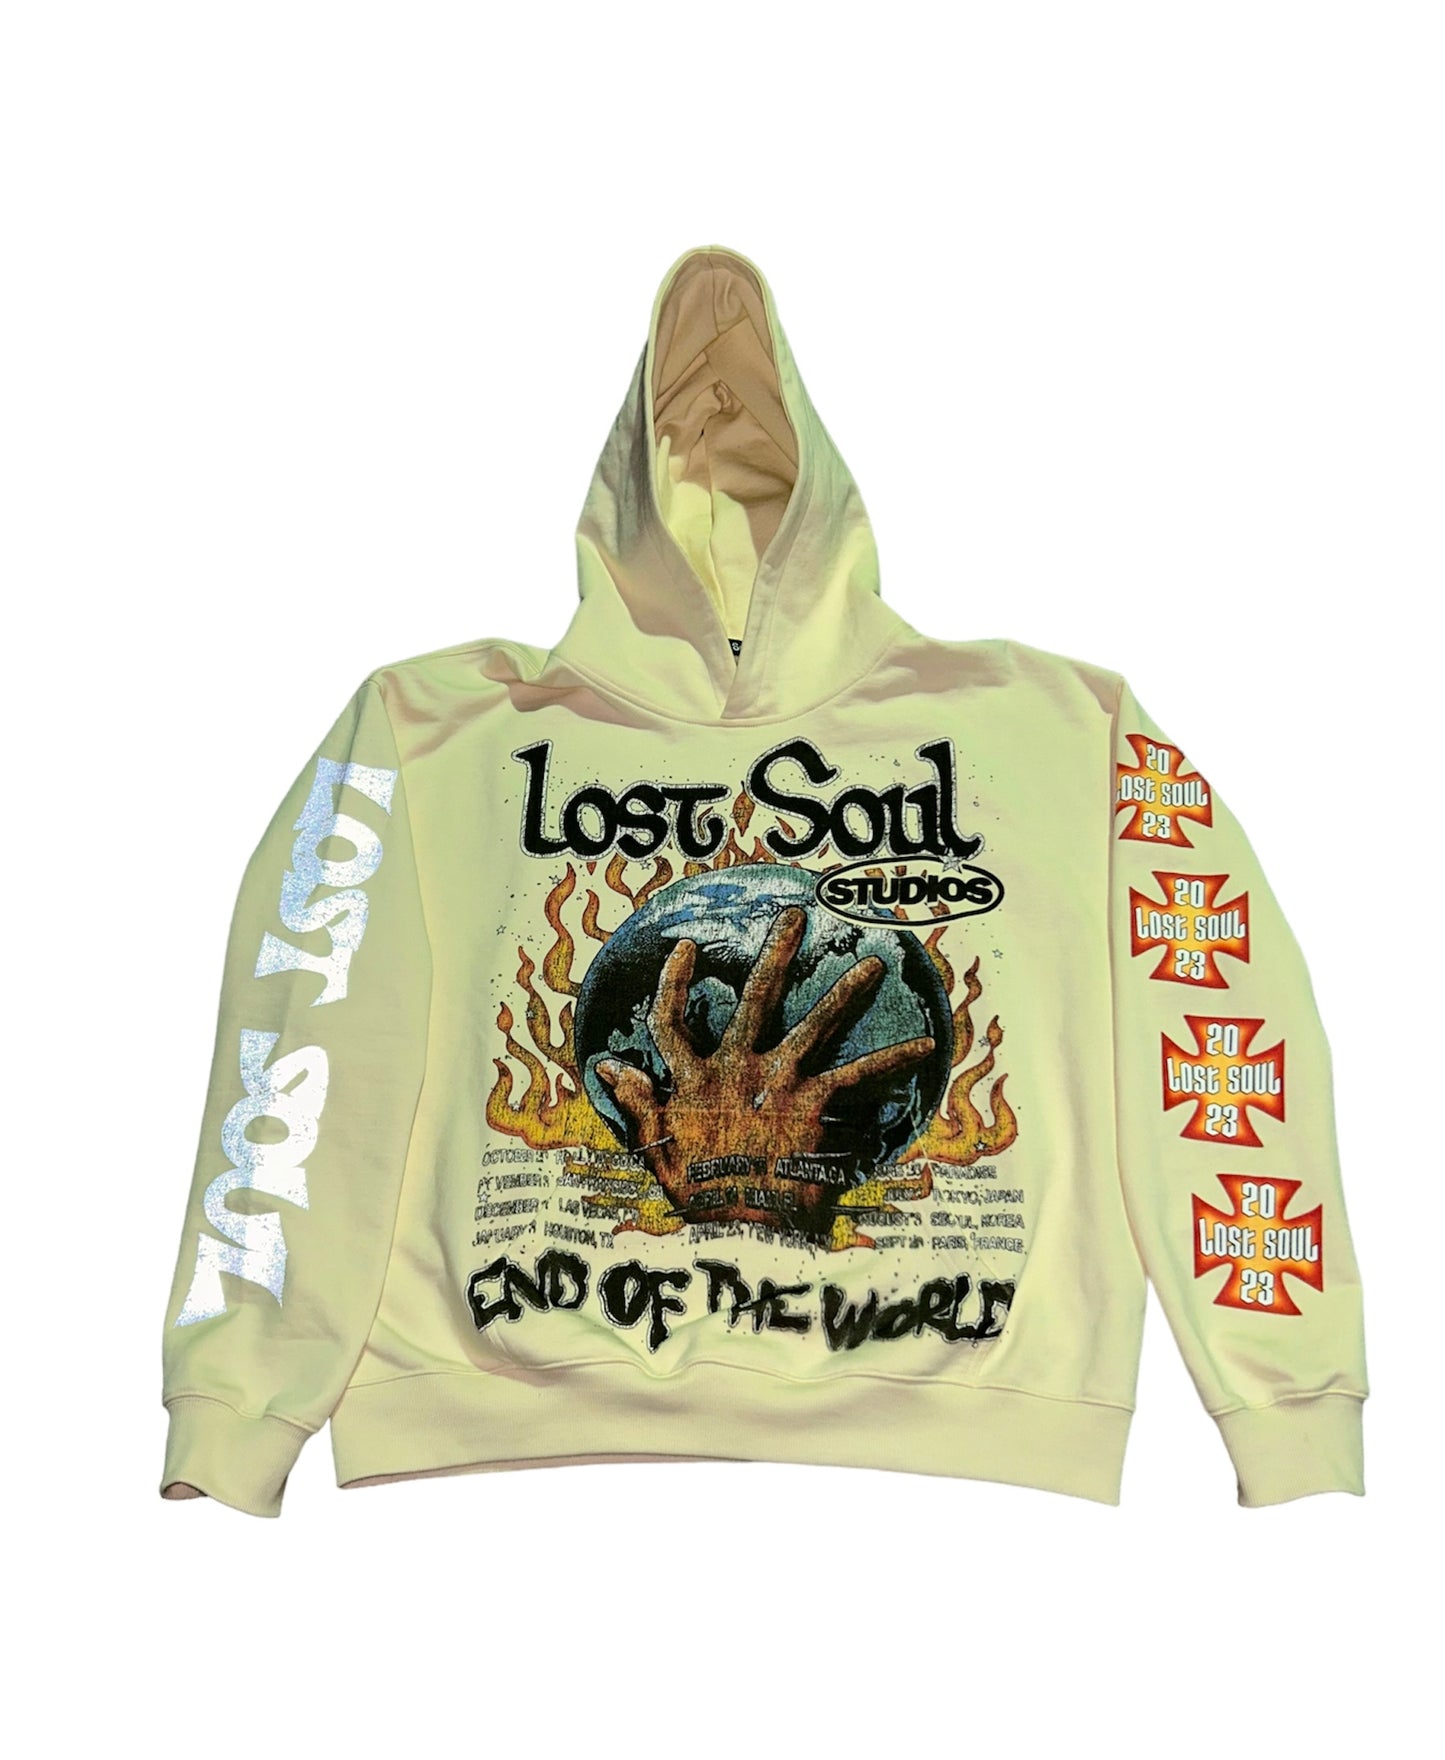 END OF THE WORLD V2 Hoodie (cream)